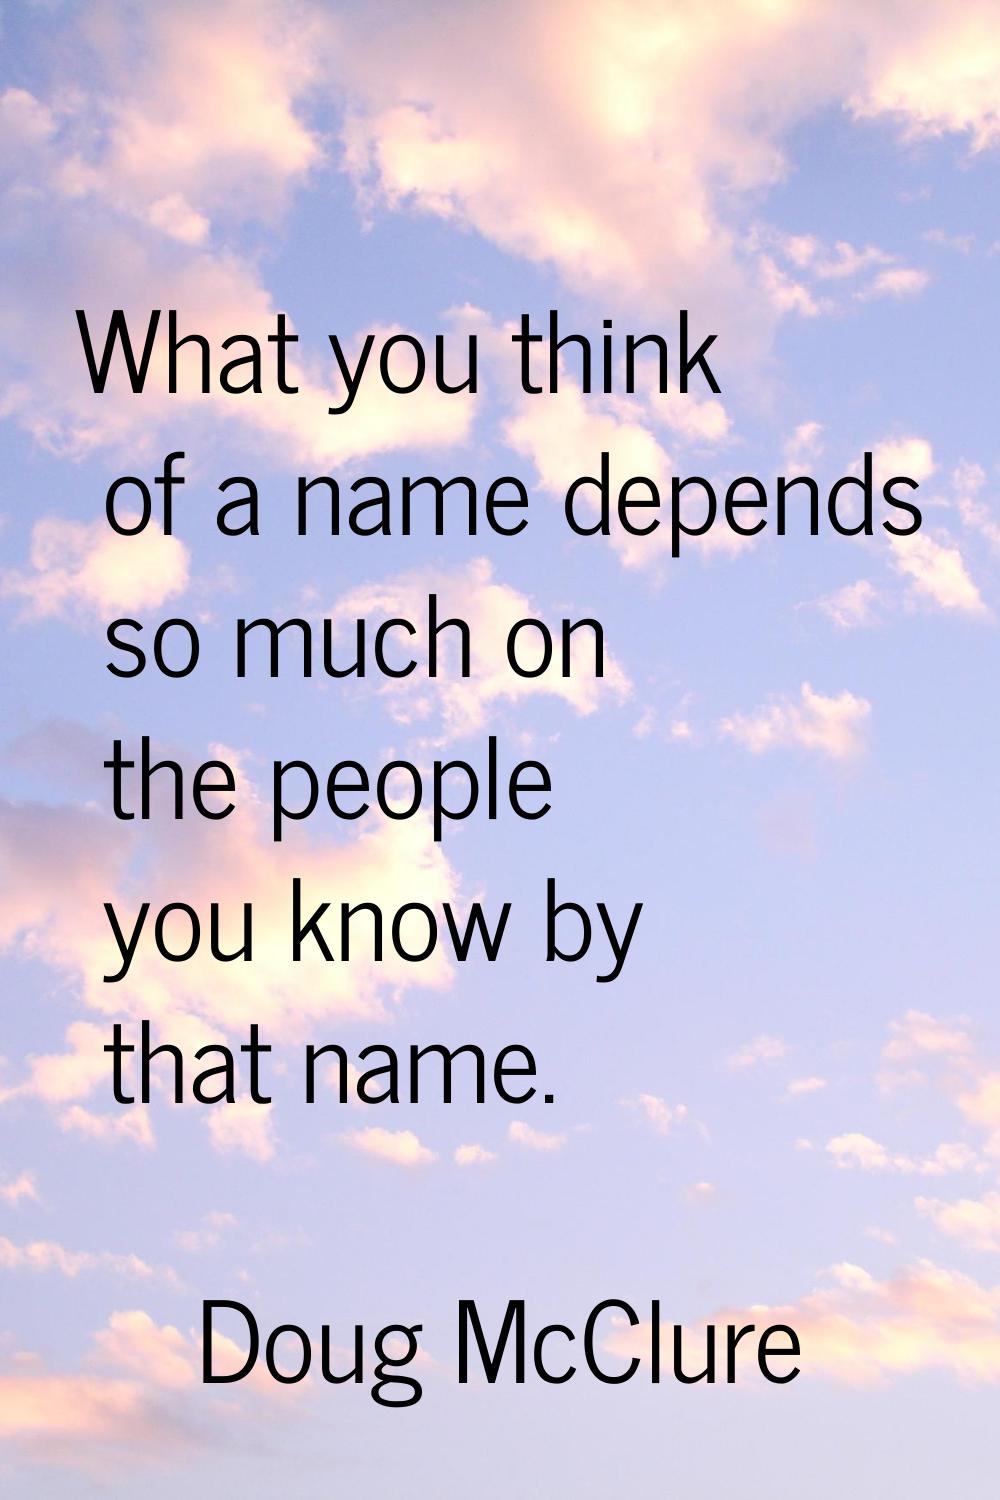 What you think of a name depends so much on the people you know by that name.